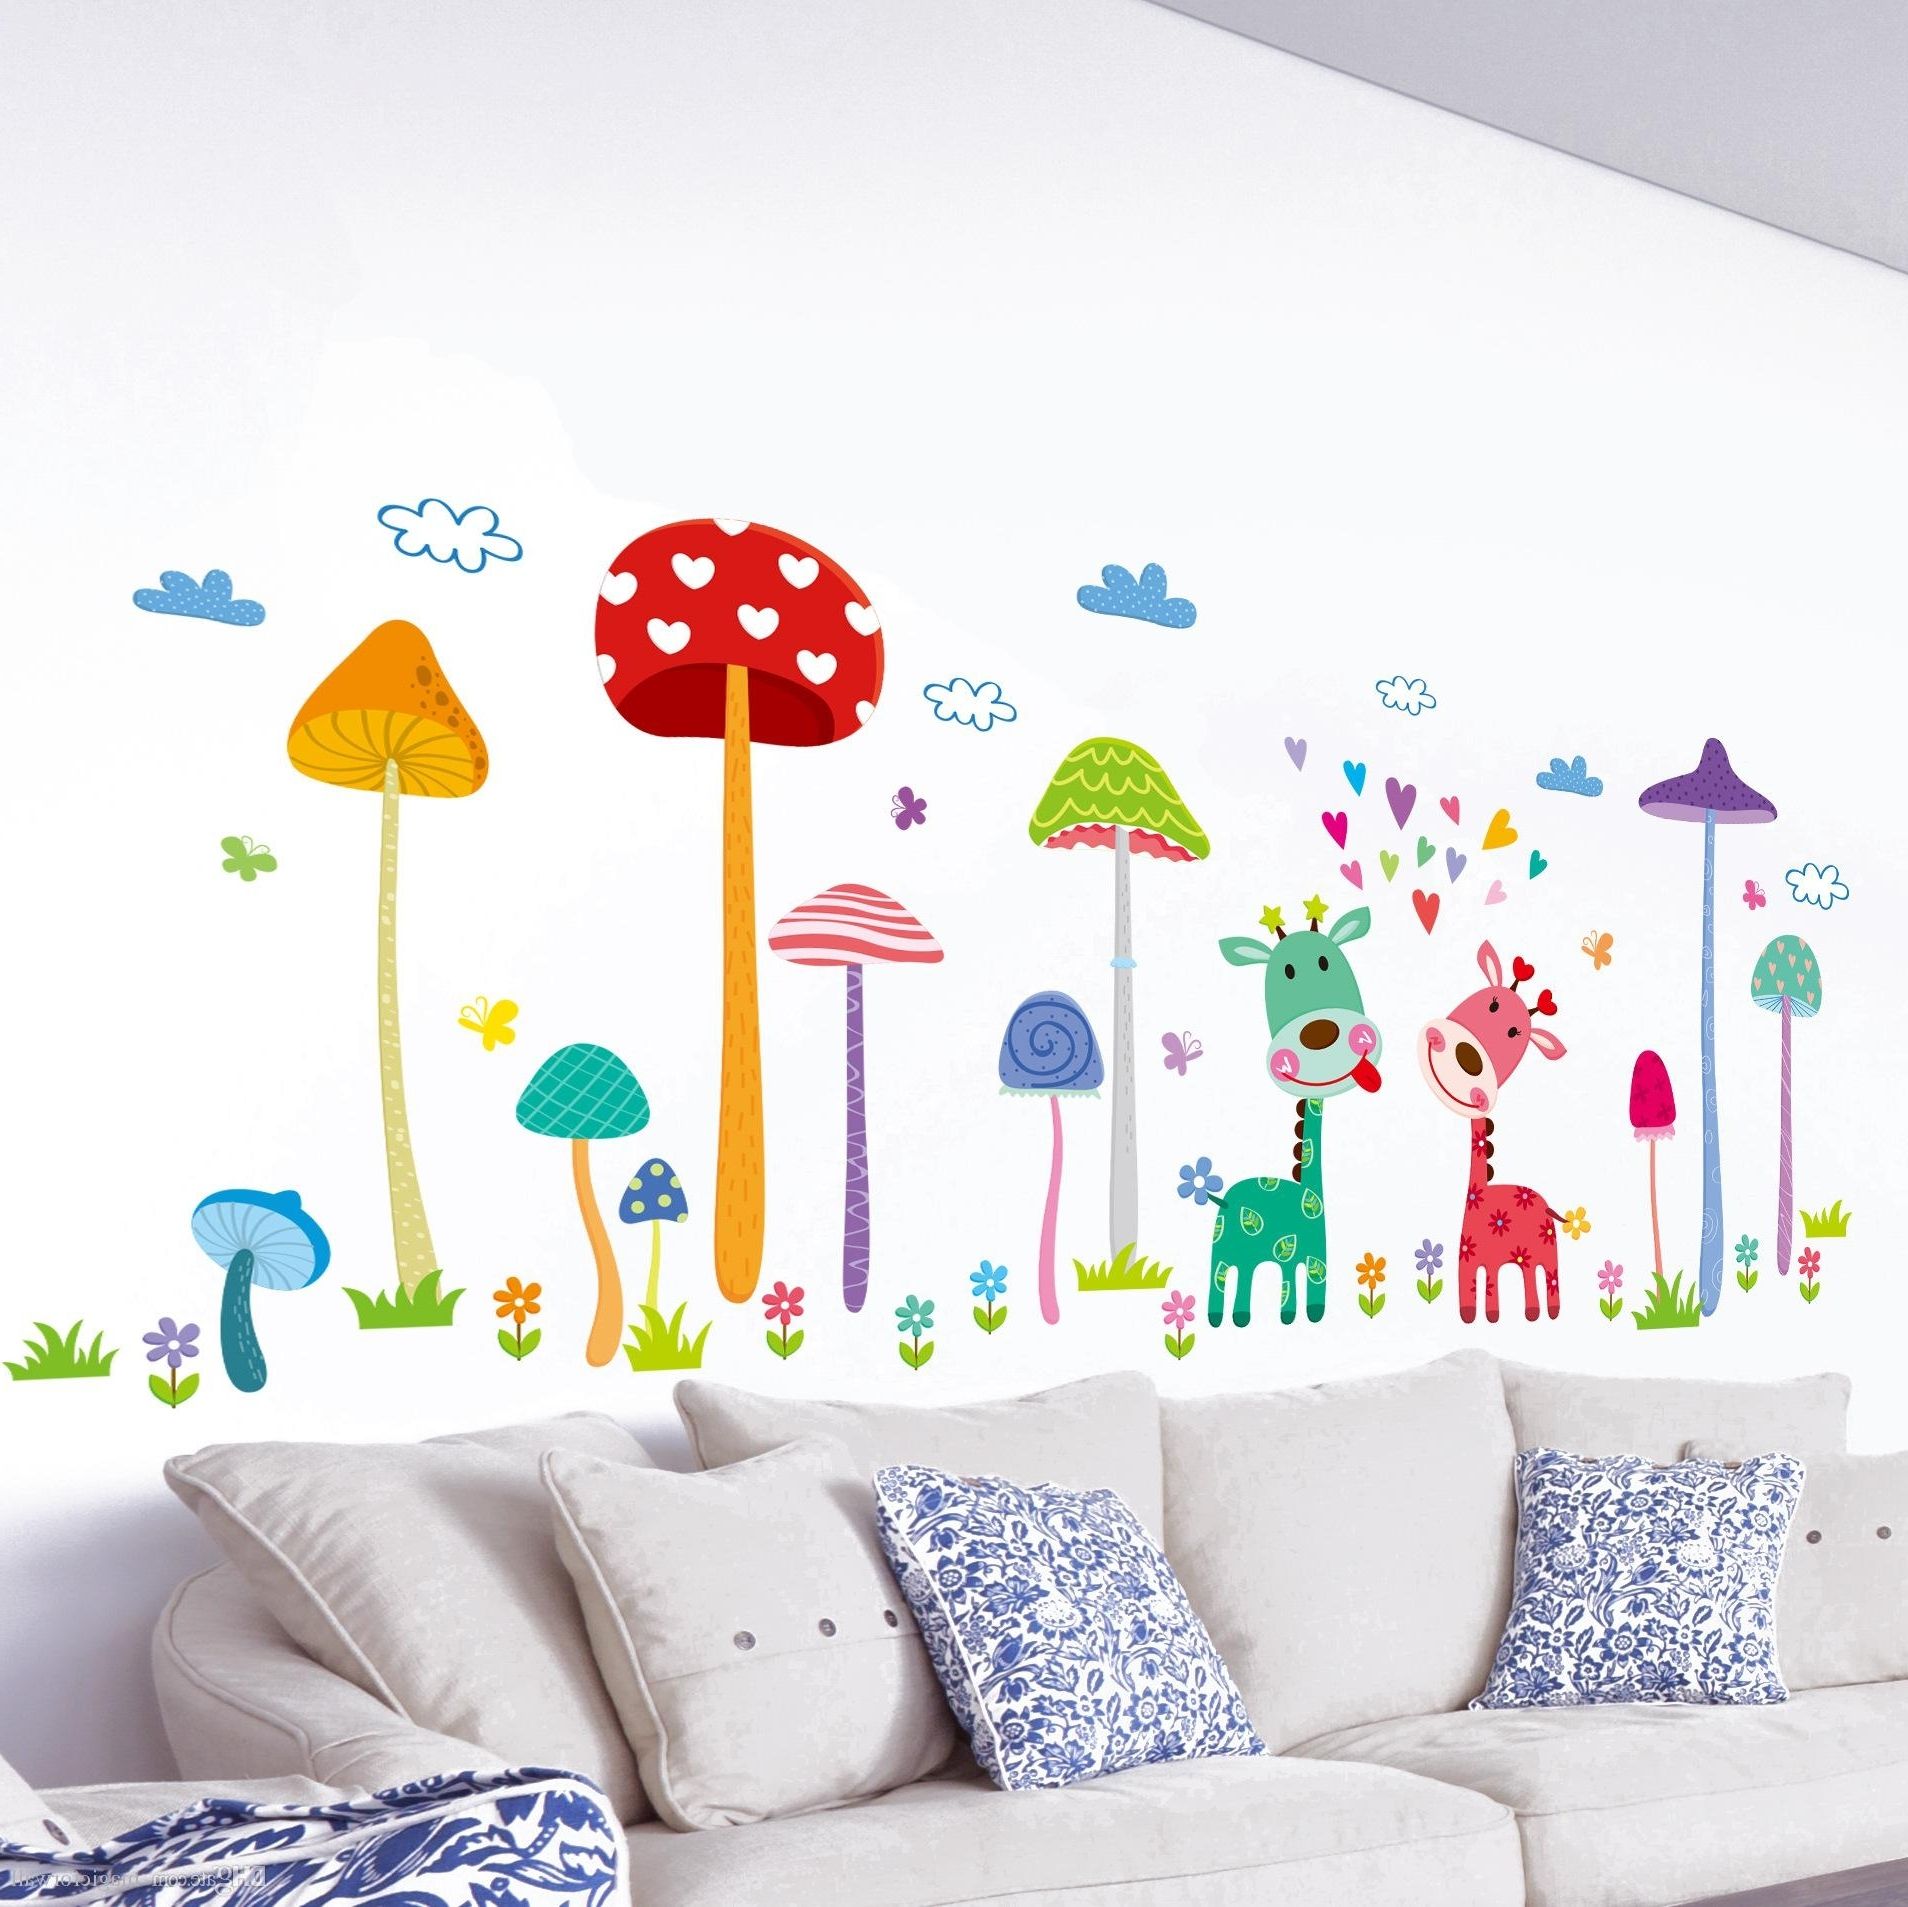 Preferred Forest Mushroom Deer Animals Home Wall Art Mural Decor Kids Babies With Regard To Baby Room Wall Art (View 1 of 15)